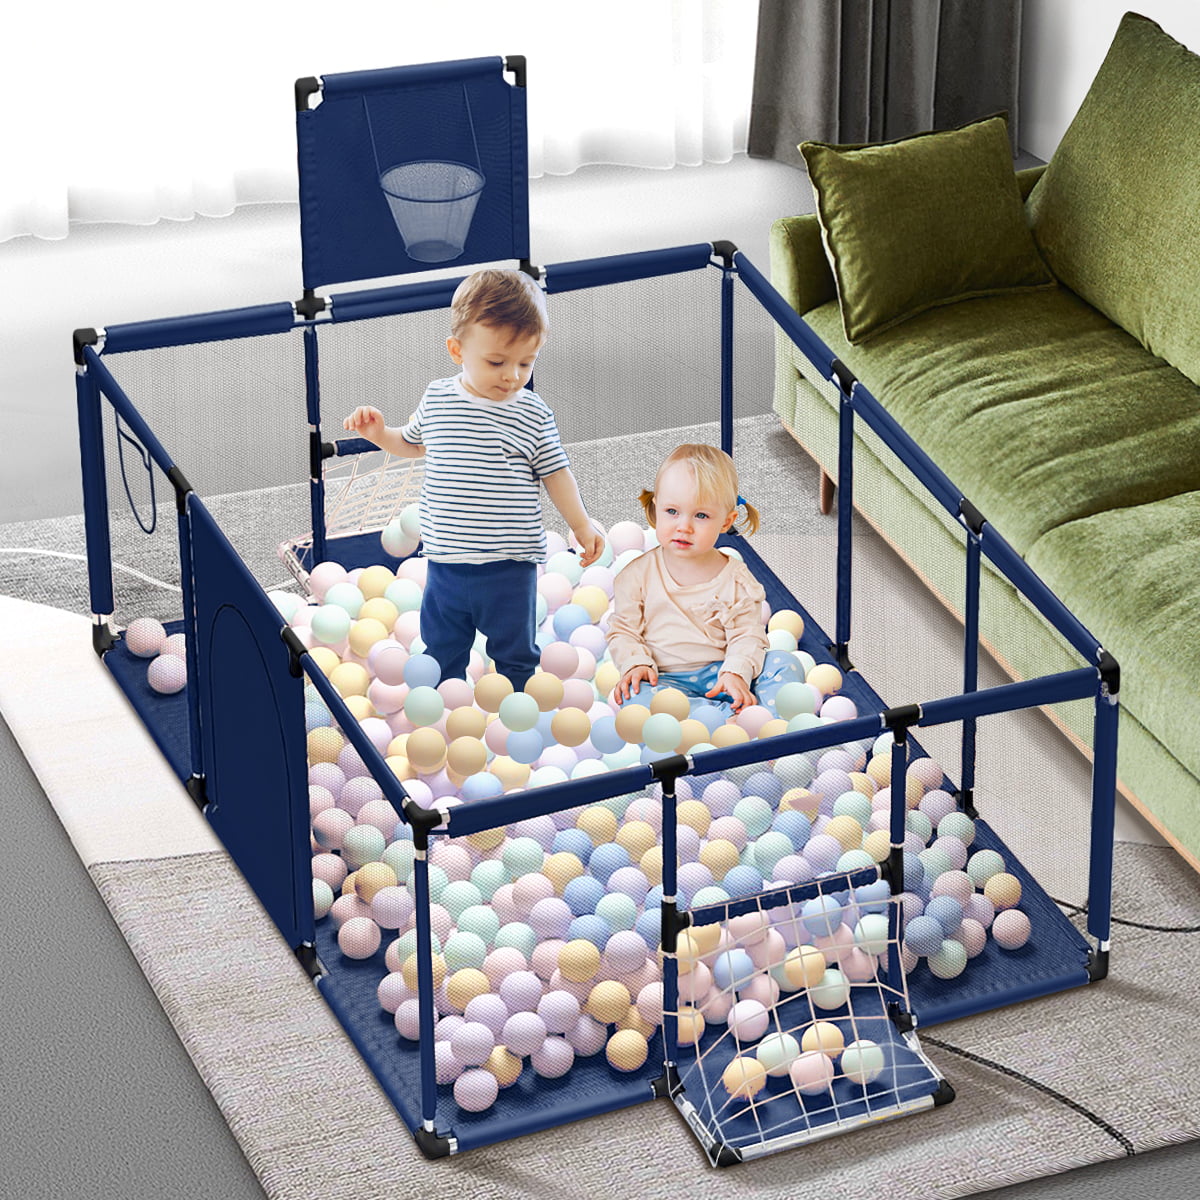 LiuSuper Large Baby Playpen with Basketball Frame Portable Safety Toddlers Playards Fence Kids Ball Pit with Breathable Mesh for Indoors Outdoors 